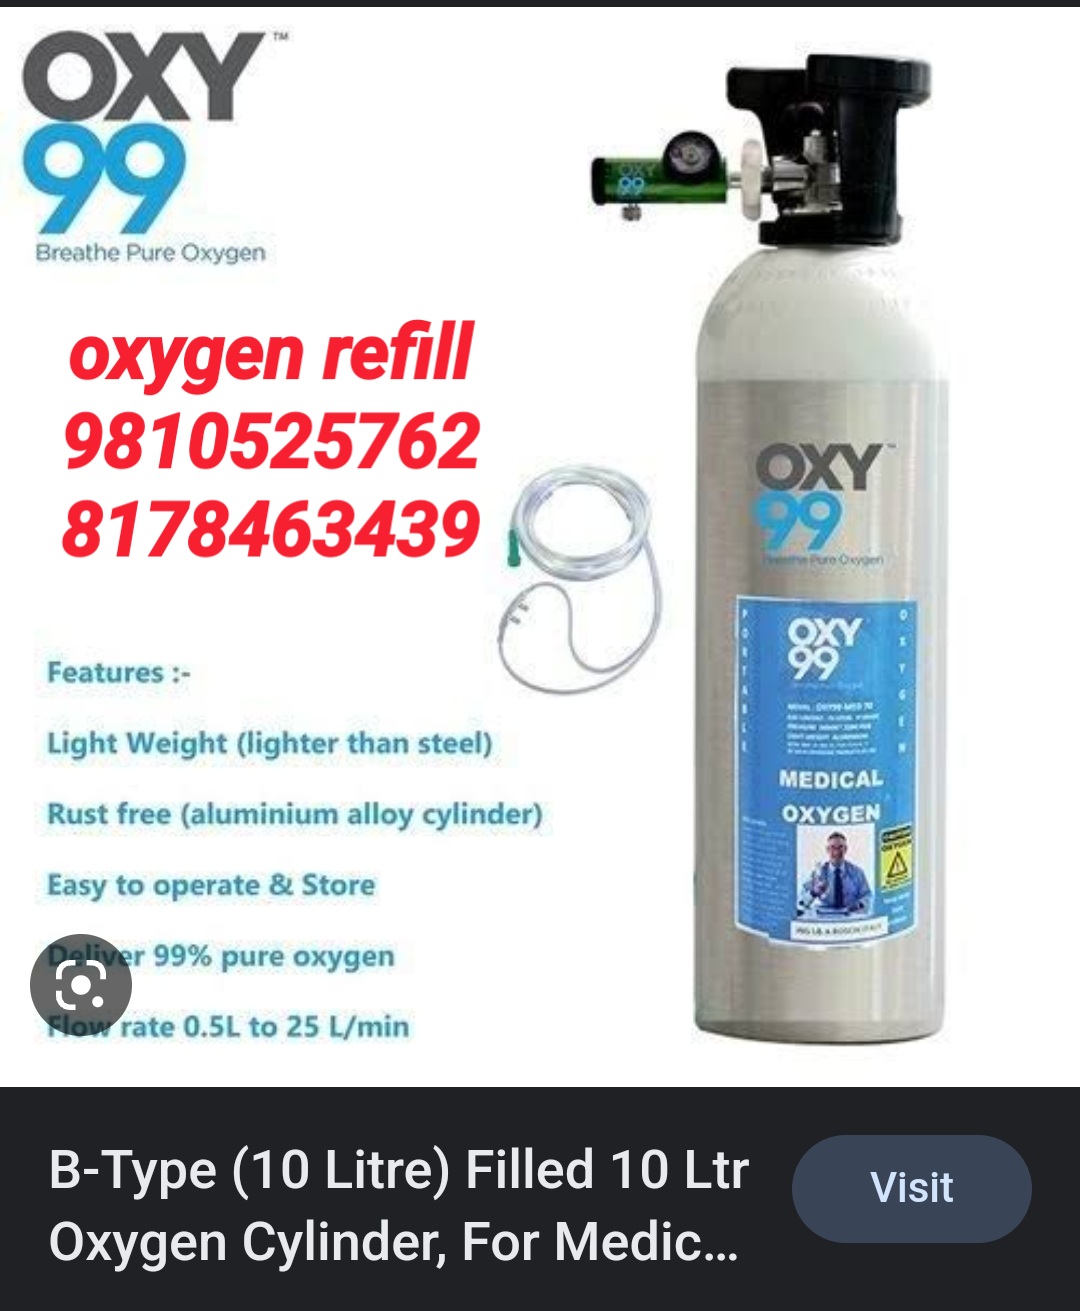 24/7 Oxygen Cylinder Hire Refill 8178463439